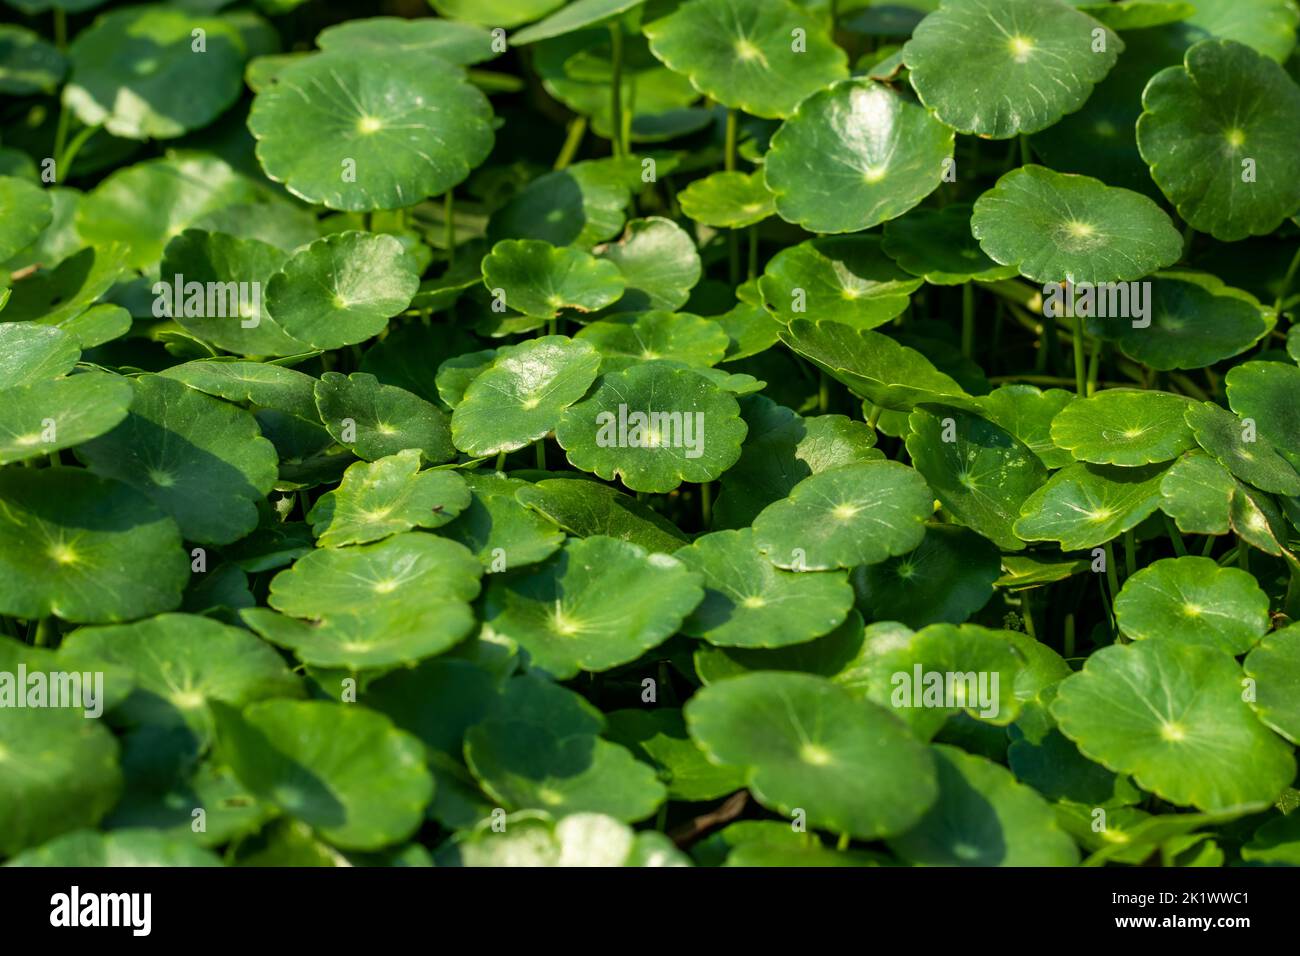 American water pennywort or Marsh pennywort or Gotu kola. This plant has round small leaves, with liliputian white flowers. Water pennywort can form d Stock Photo